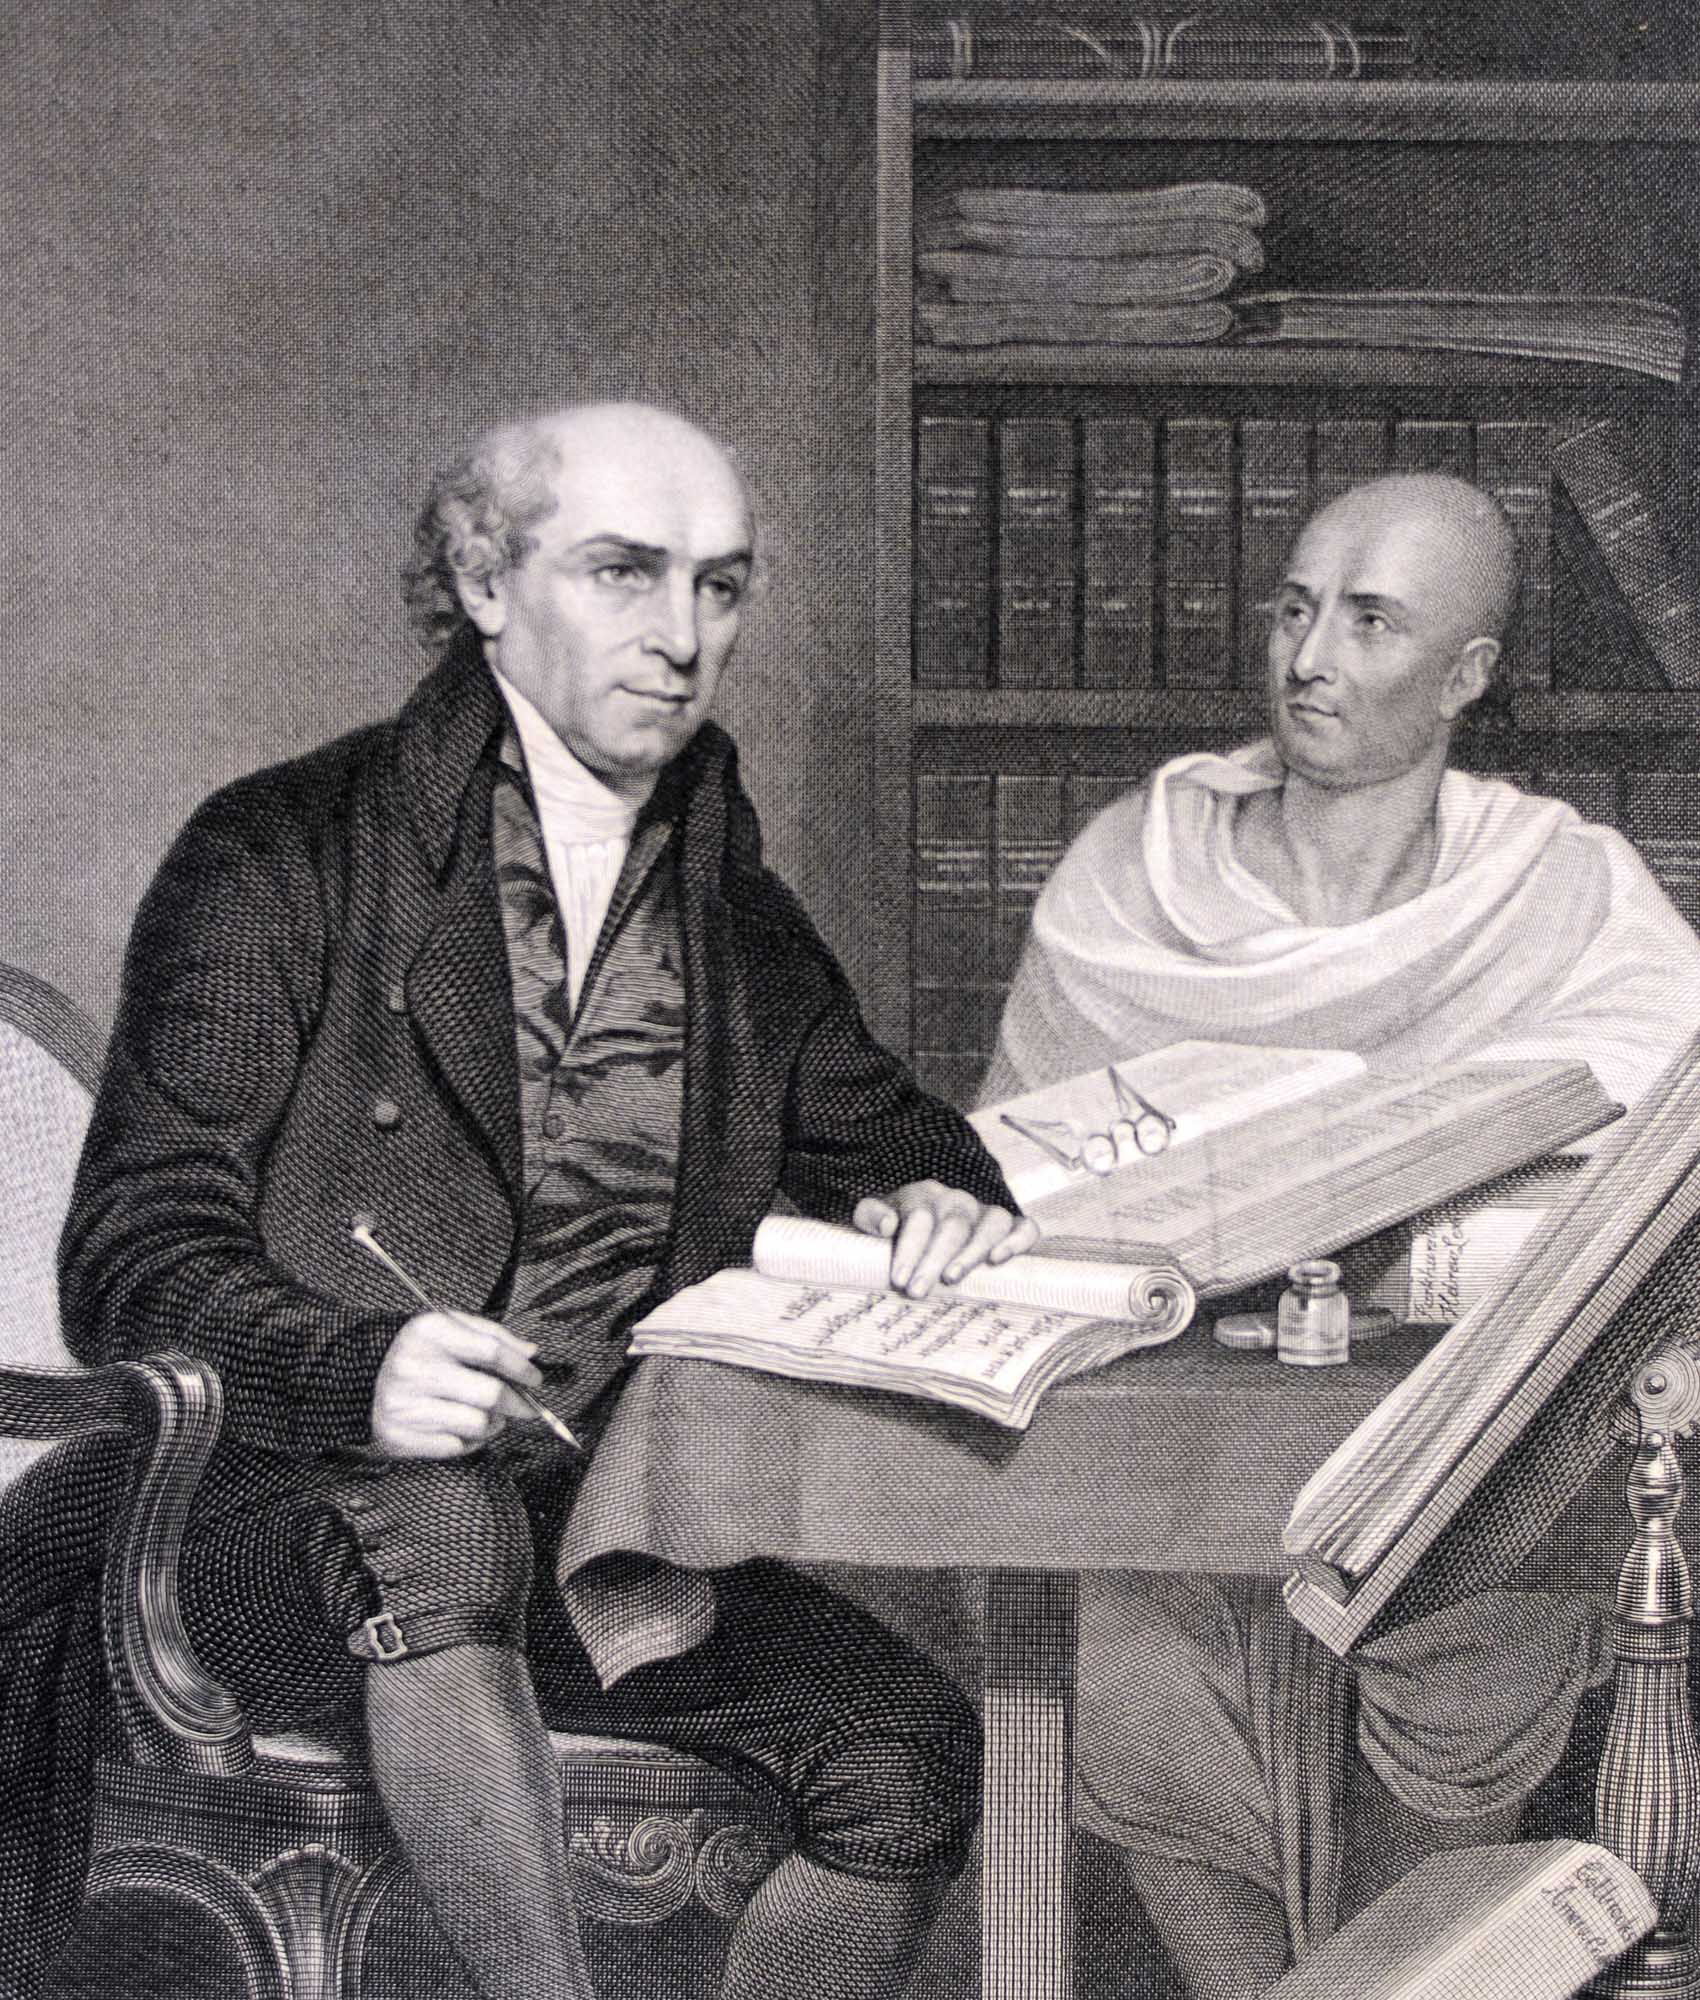 A print showing William Carey with his Indian translator at The College of Fort William, Calcutta, 1813 - 